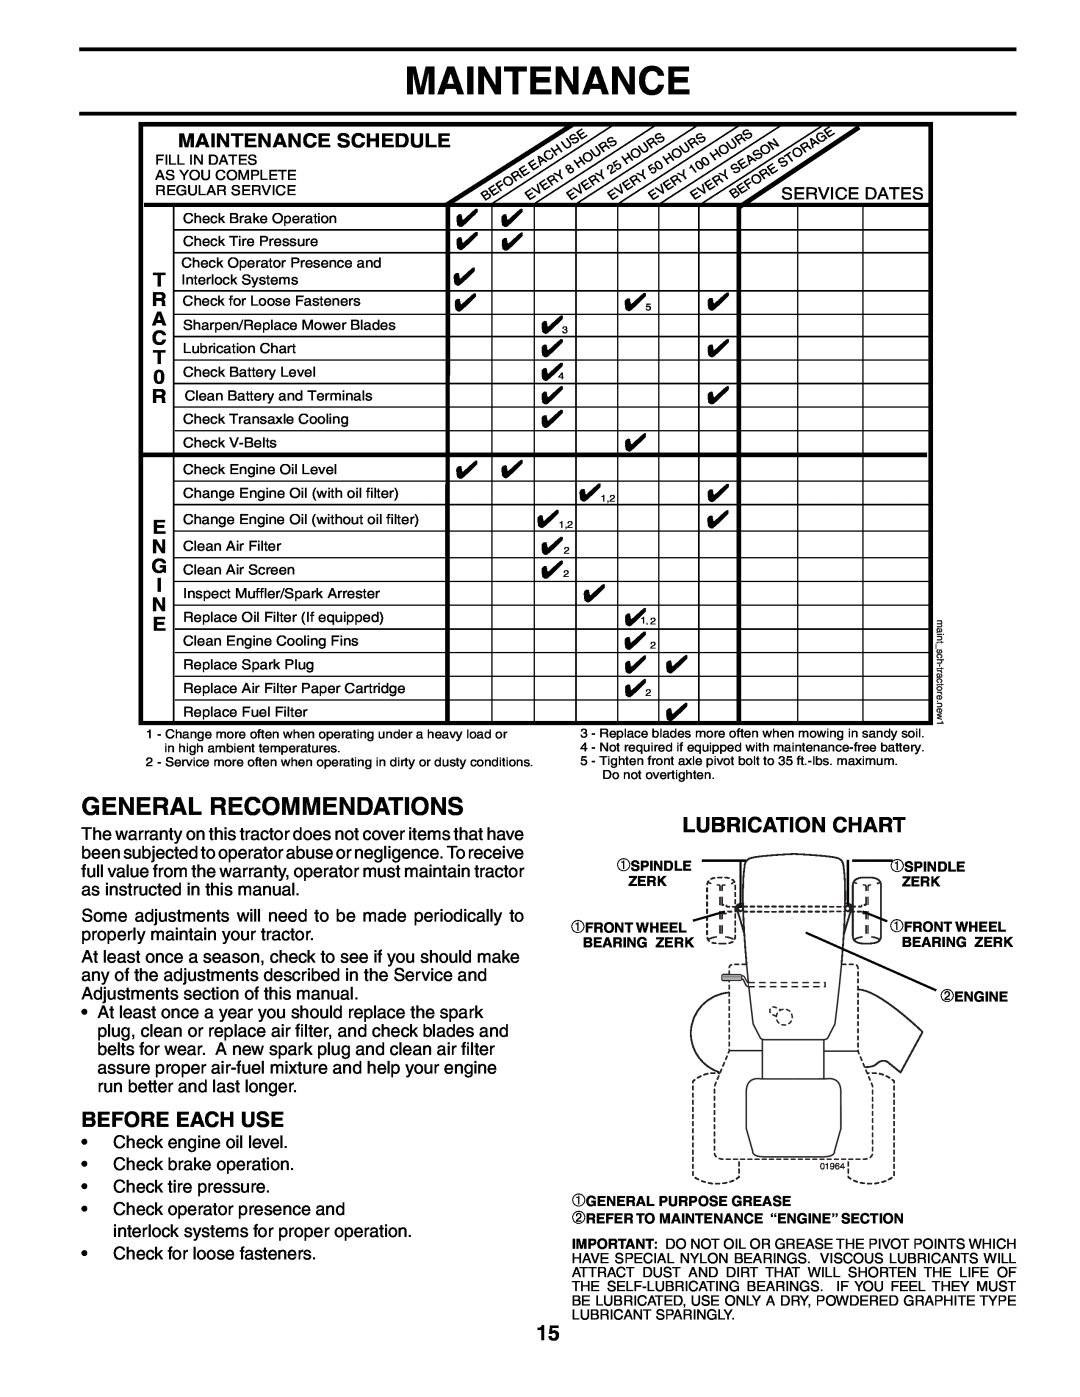 Husqvarna LTH18542 owner manual General Recommendations, Lubrication Chart, Before Each Use, Maintenance Schedule 